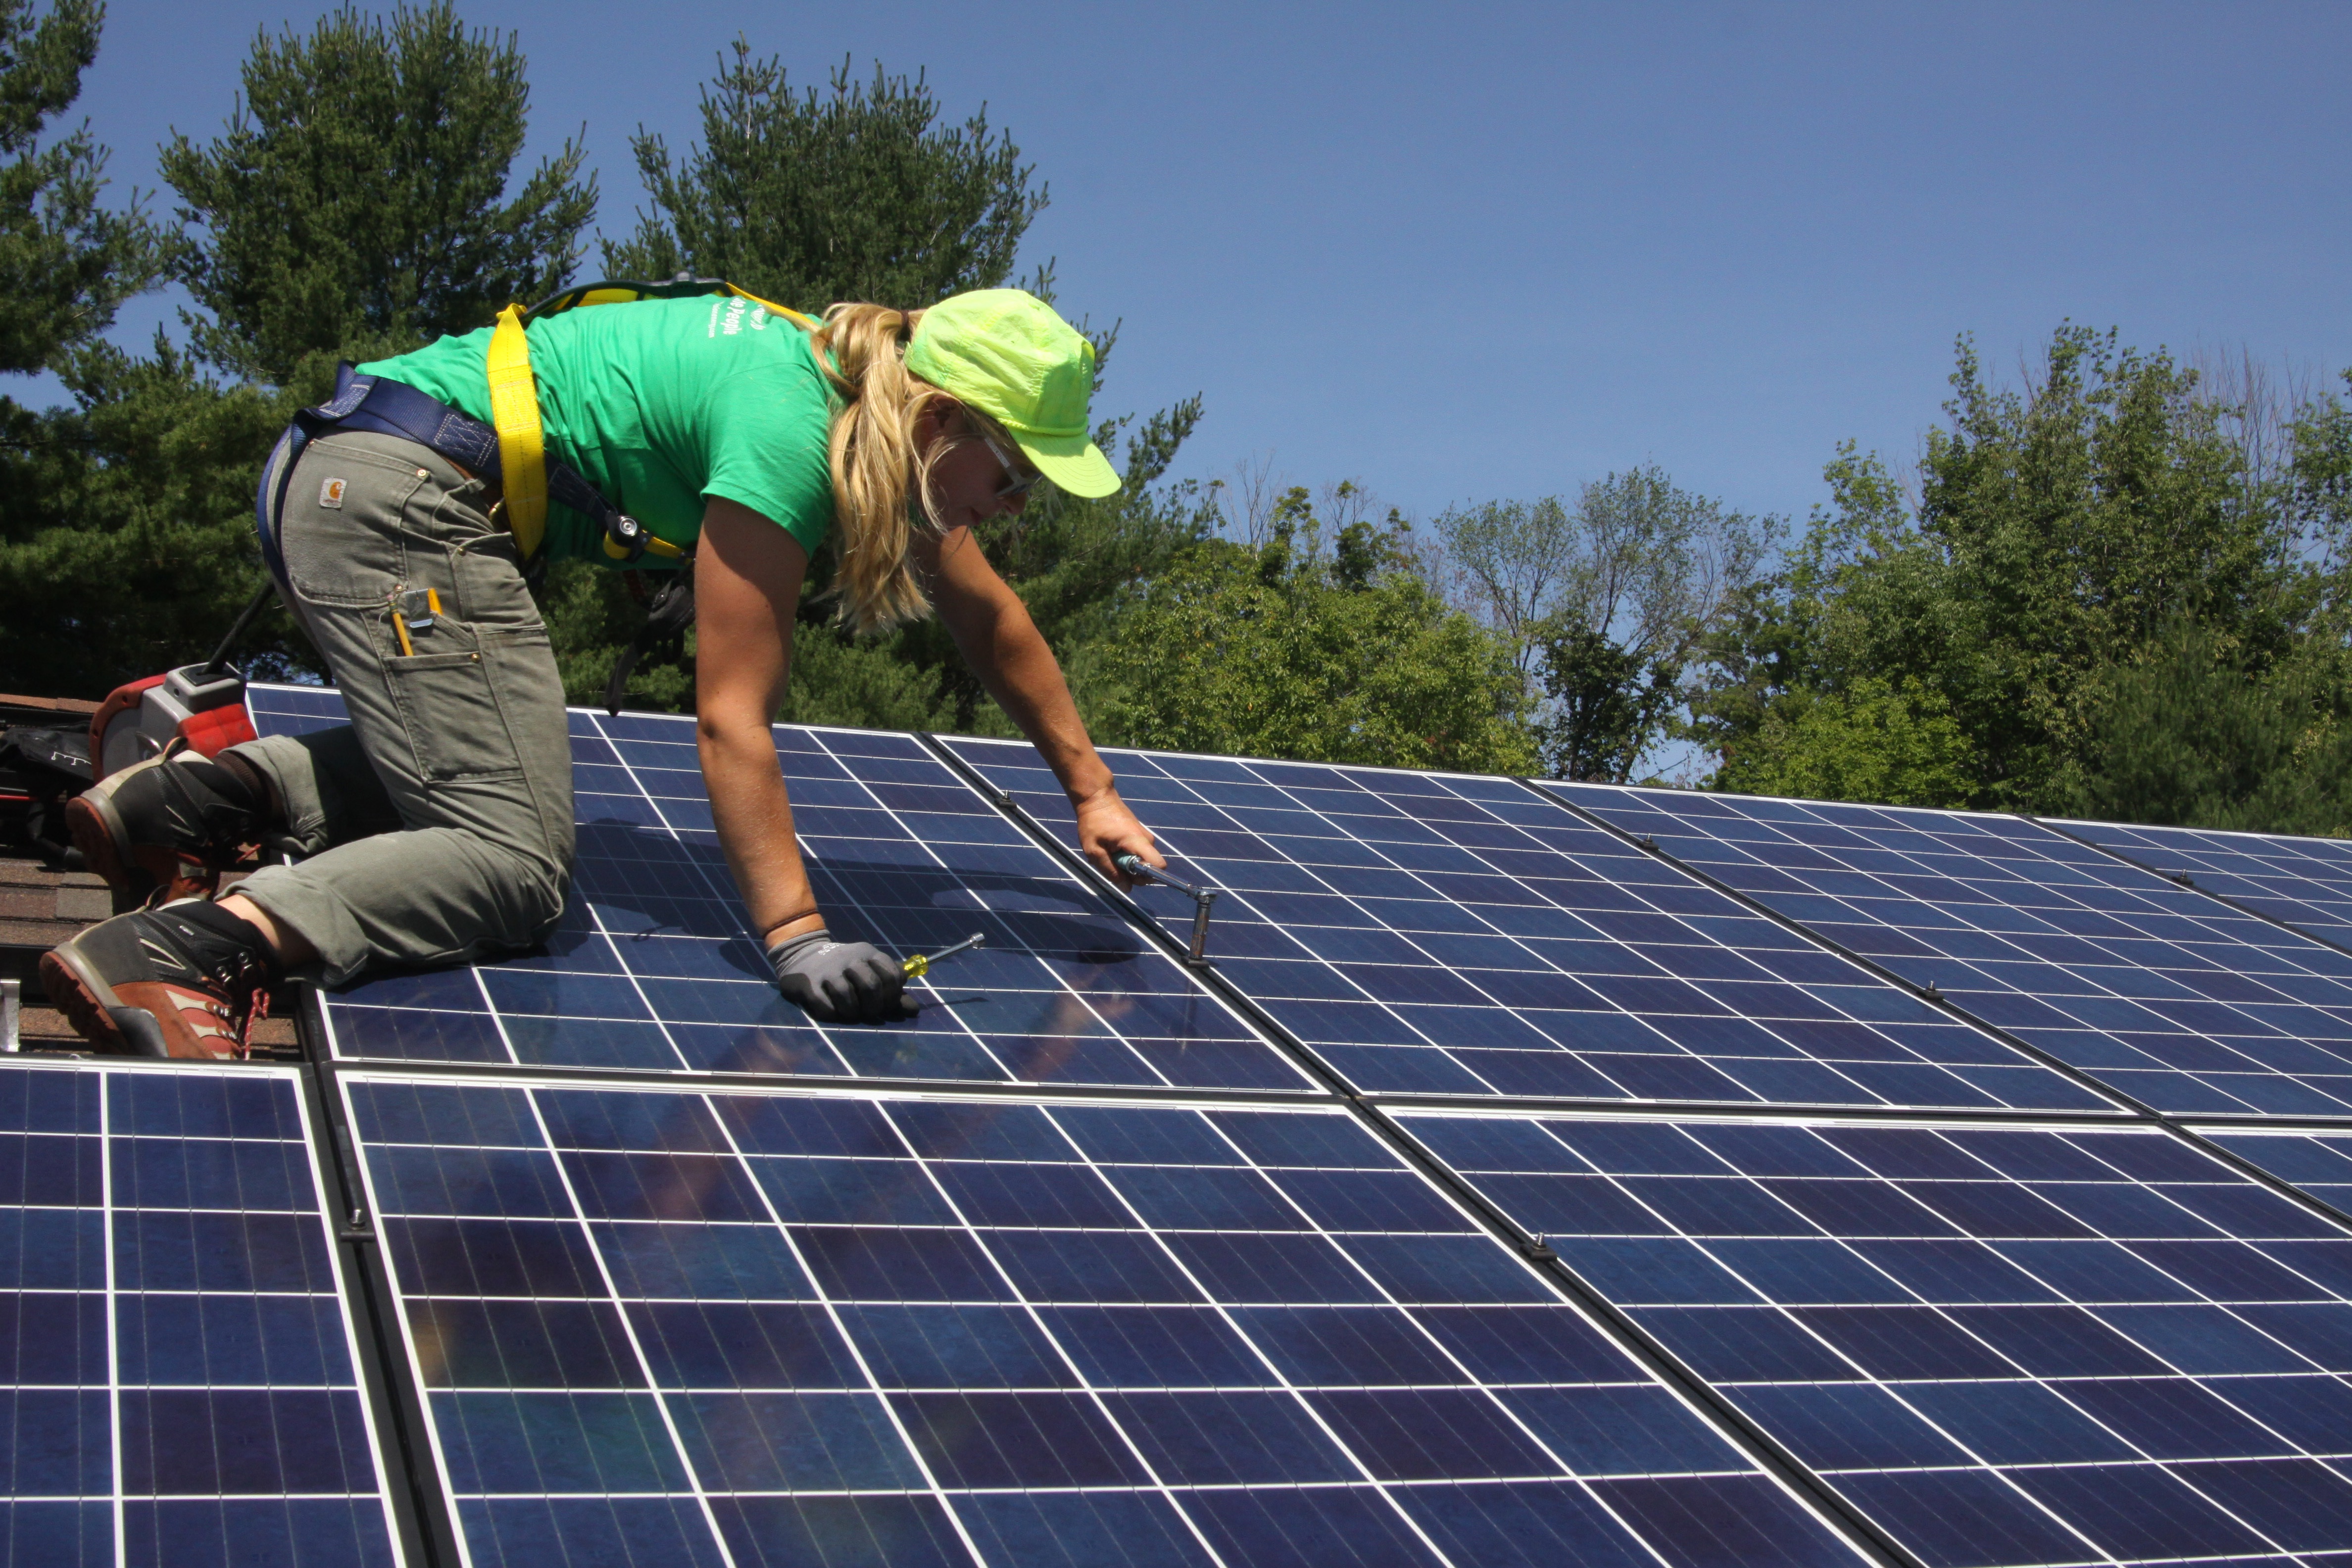 A person kneels on solar panels with tools in hand.